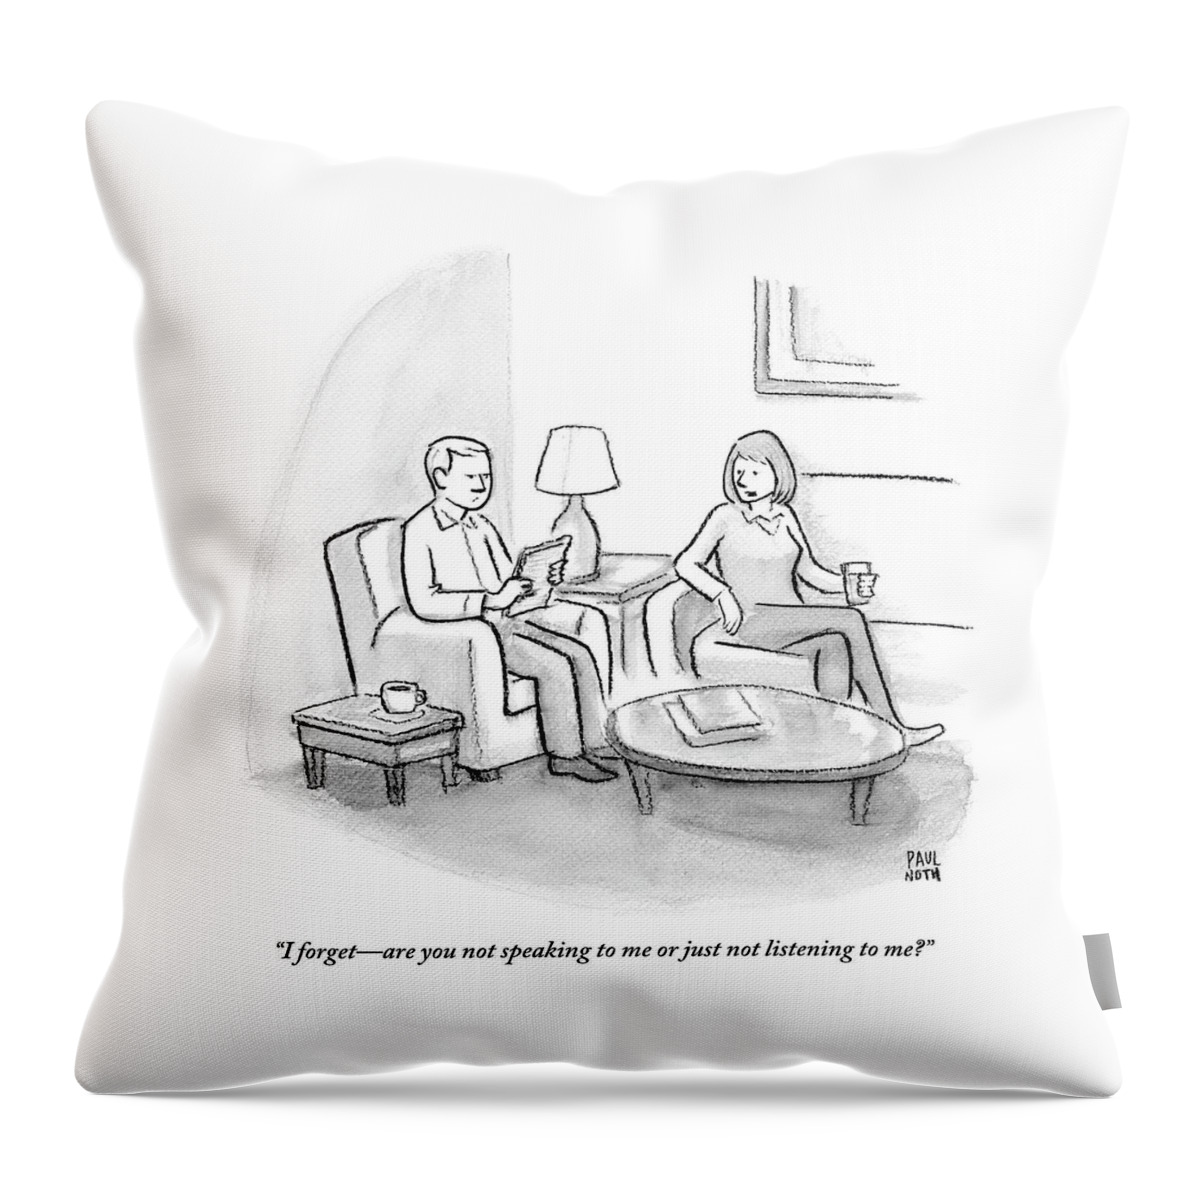 A Woman Speaks To A Man. Both Are Seated Throw Pillow